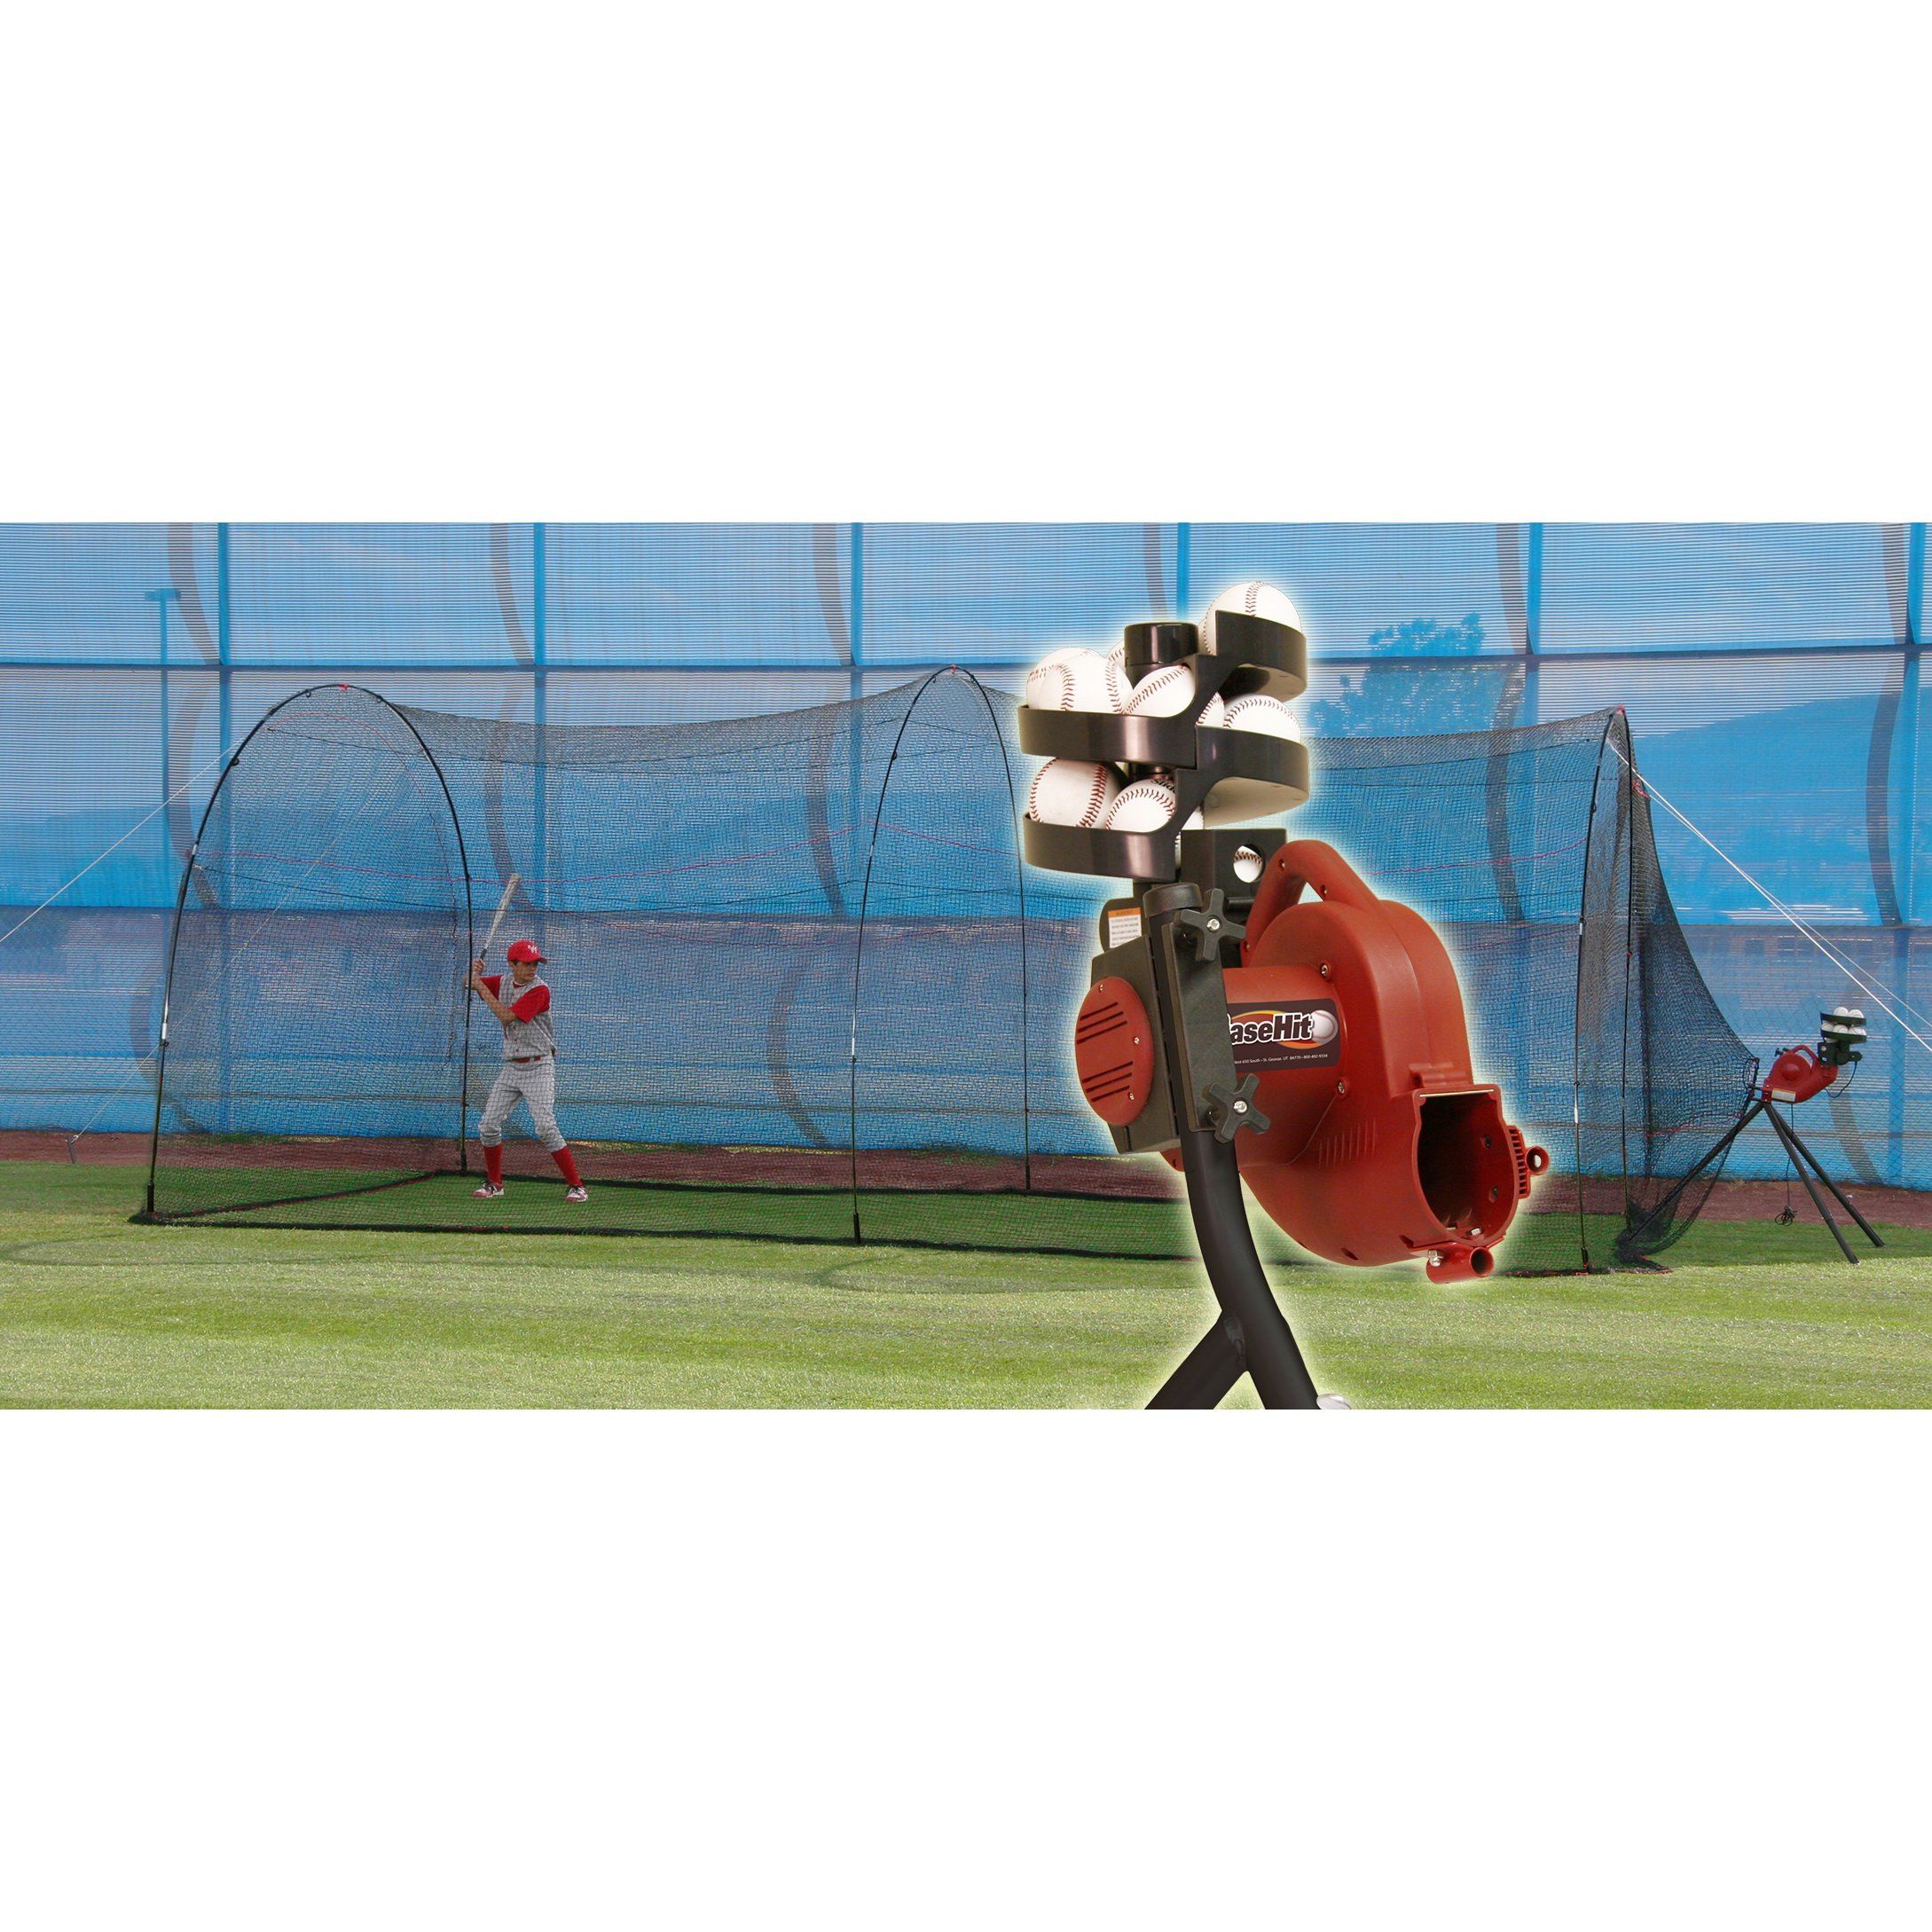 Heater Sports BaseHit & PowerAlley 22' Batting Cage Kit - Pitch Pro Direct